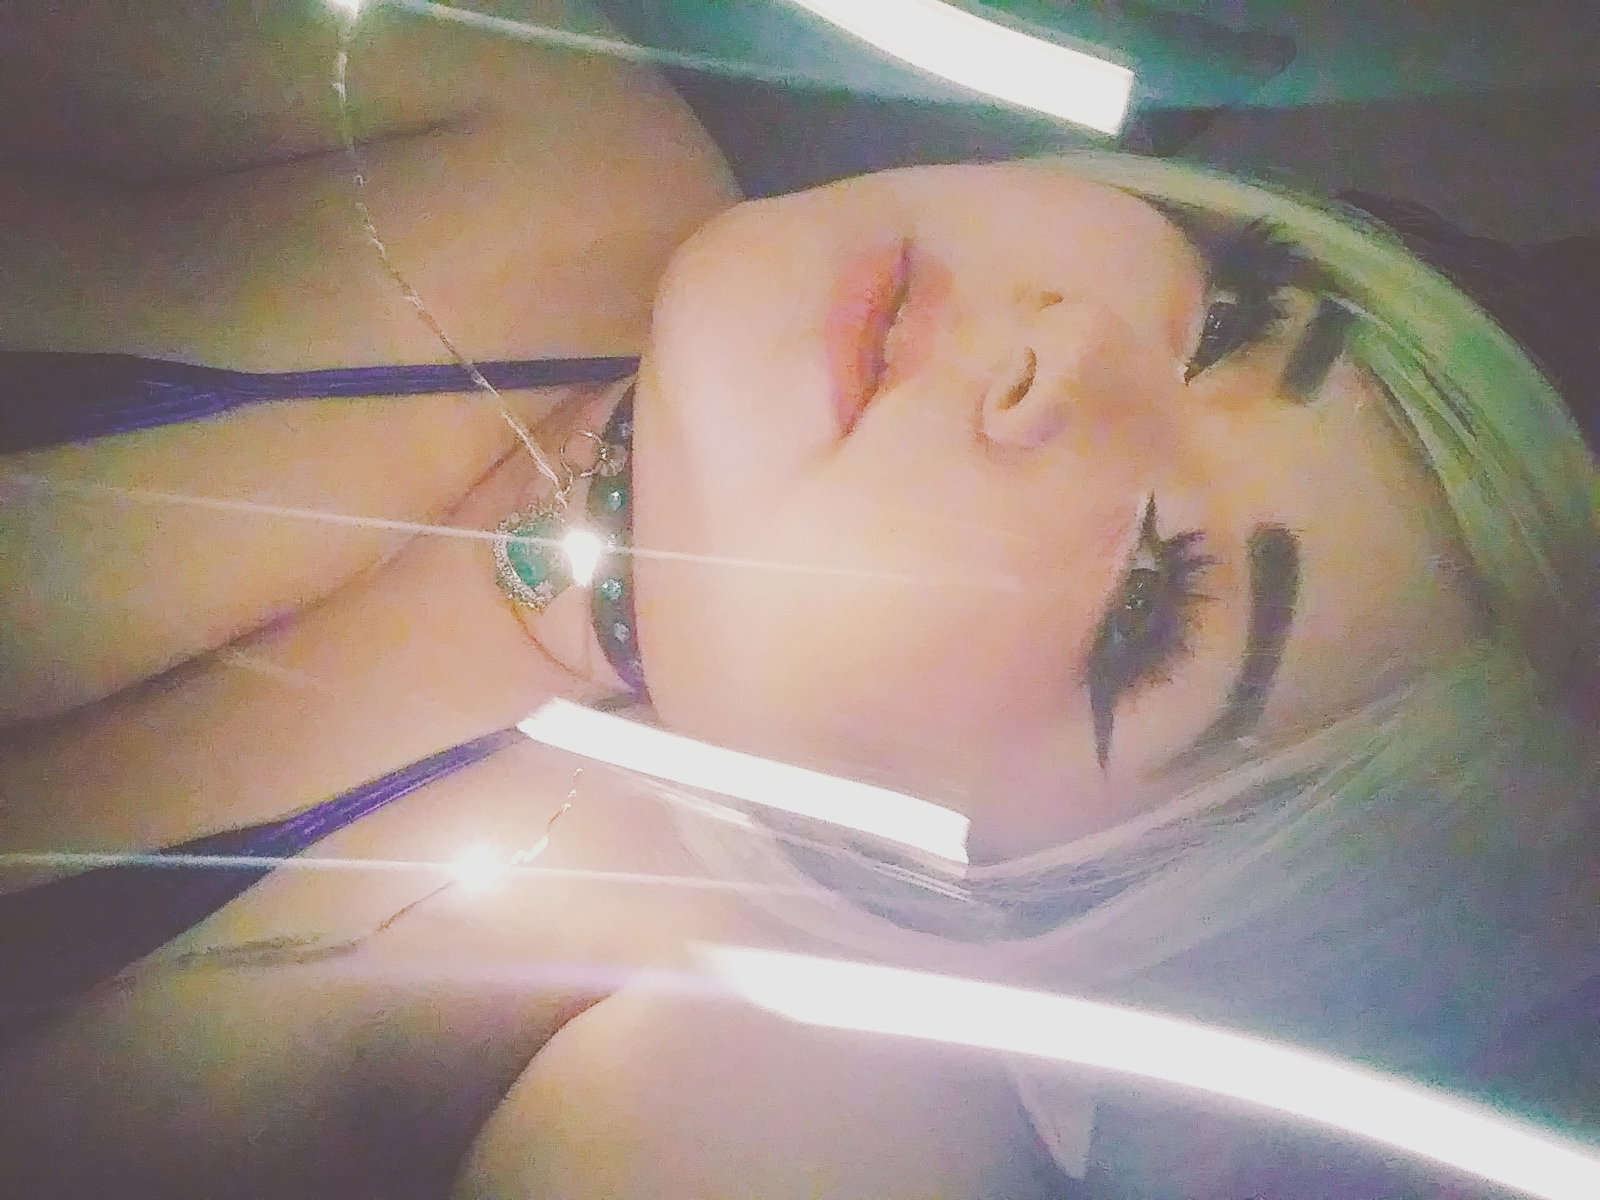 Photo by Marieaqua with the username @Marieaqua, who is a verified user,  February 25, 2019 at 7:16 AM. The post is about the topic Big ass and the text says 'Who doesn't like an elf with big boobs and an ass!?'